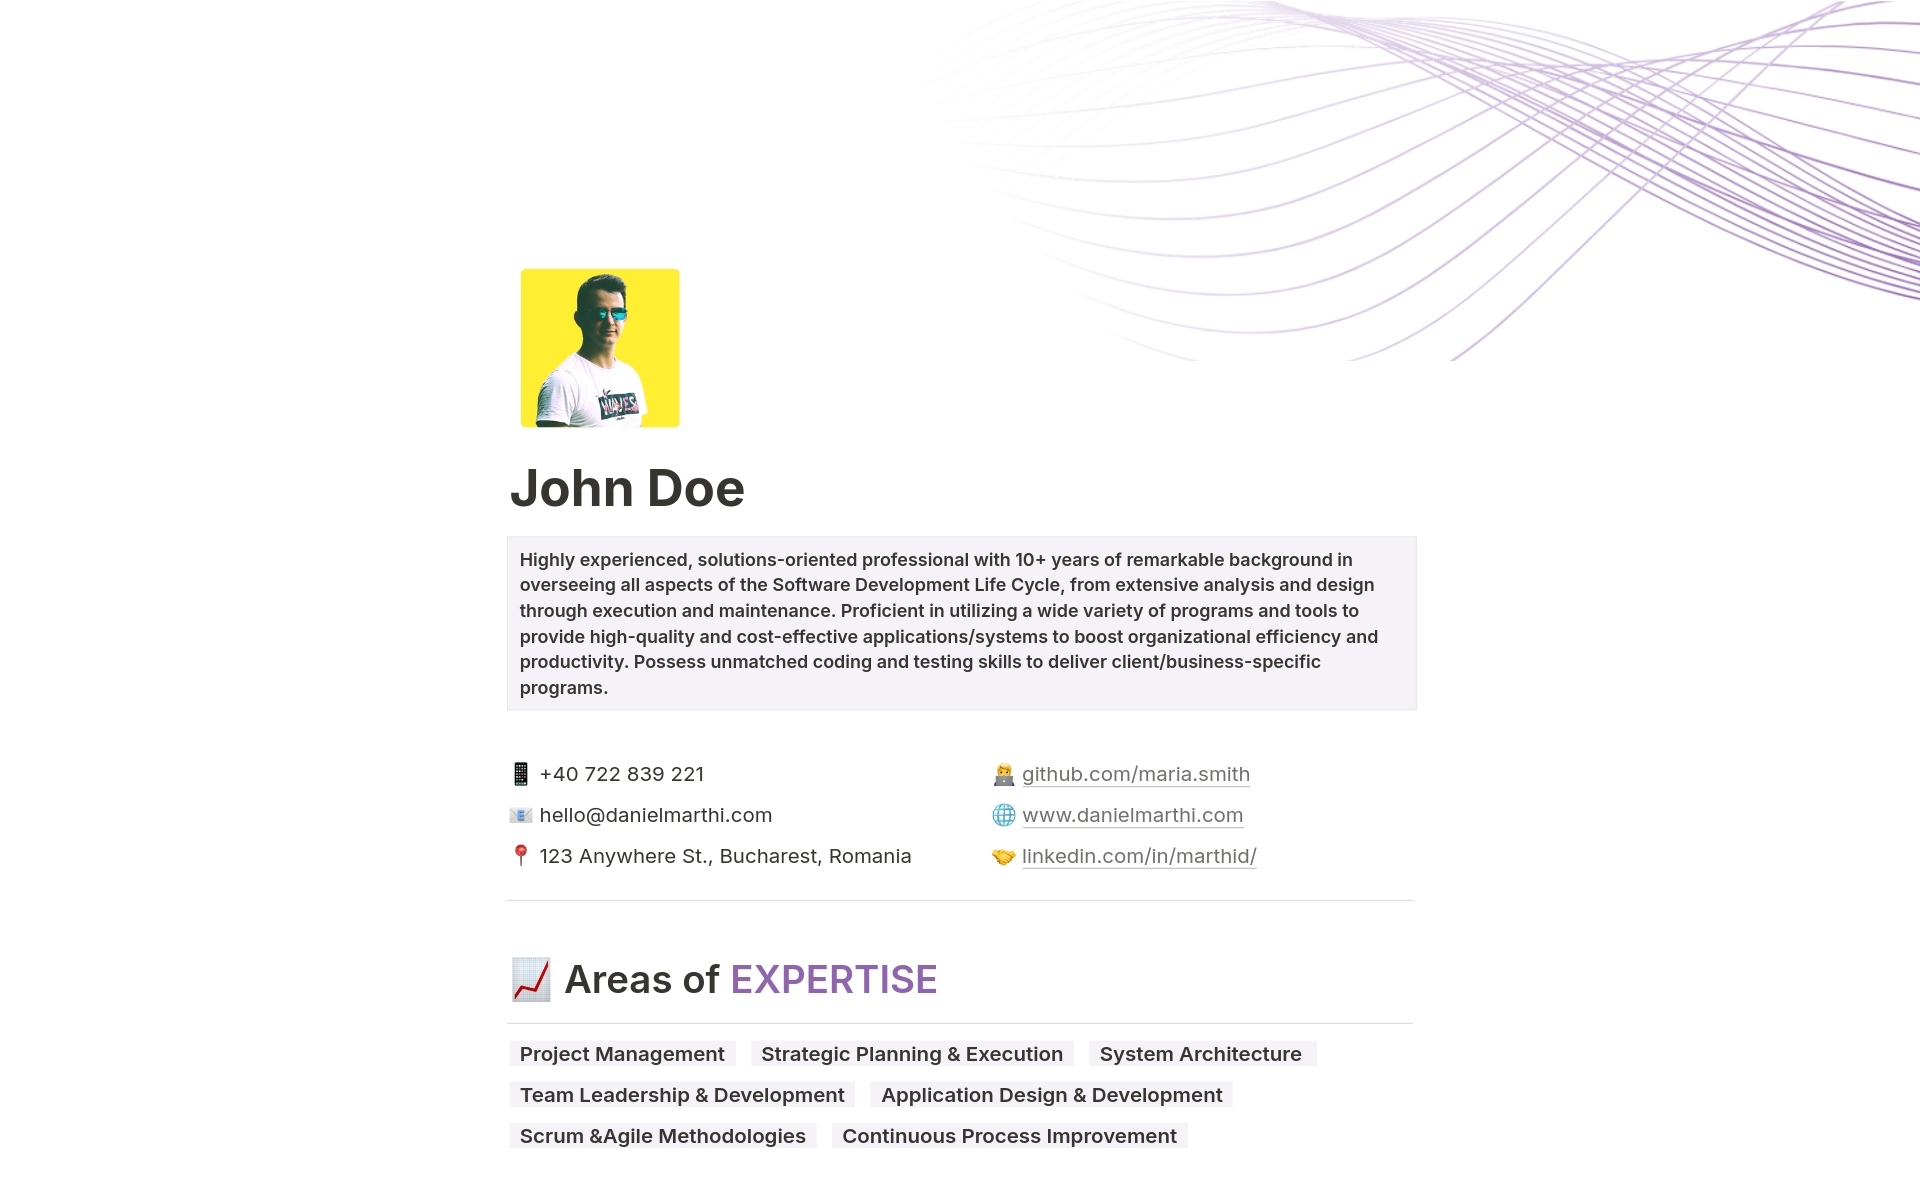 A simple CV/Resume template for Notion.